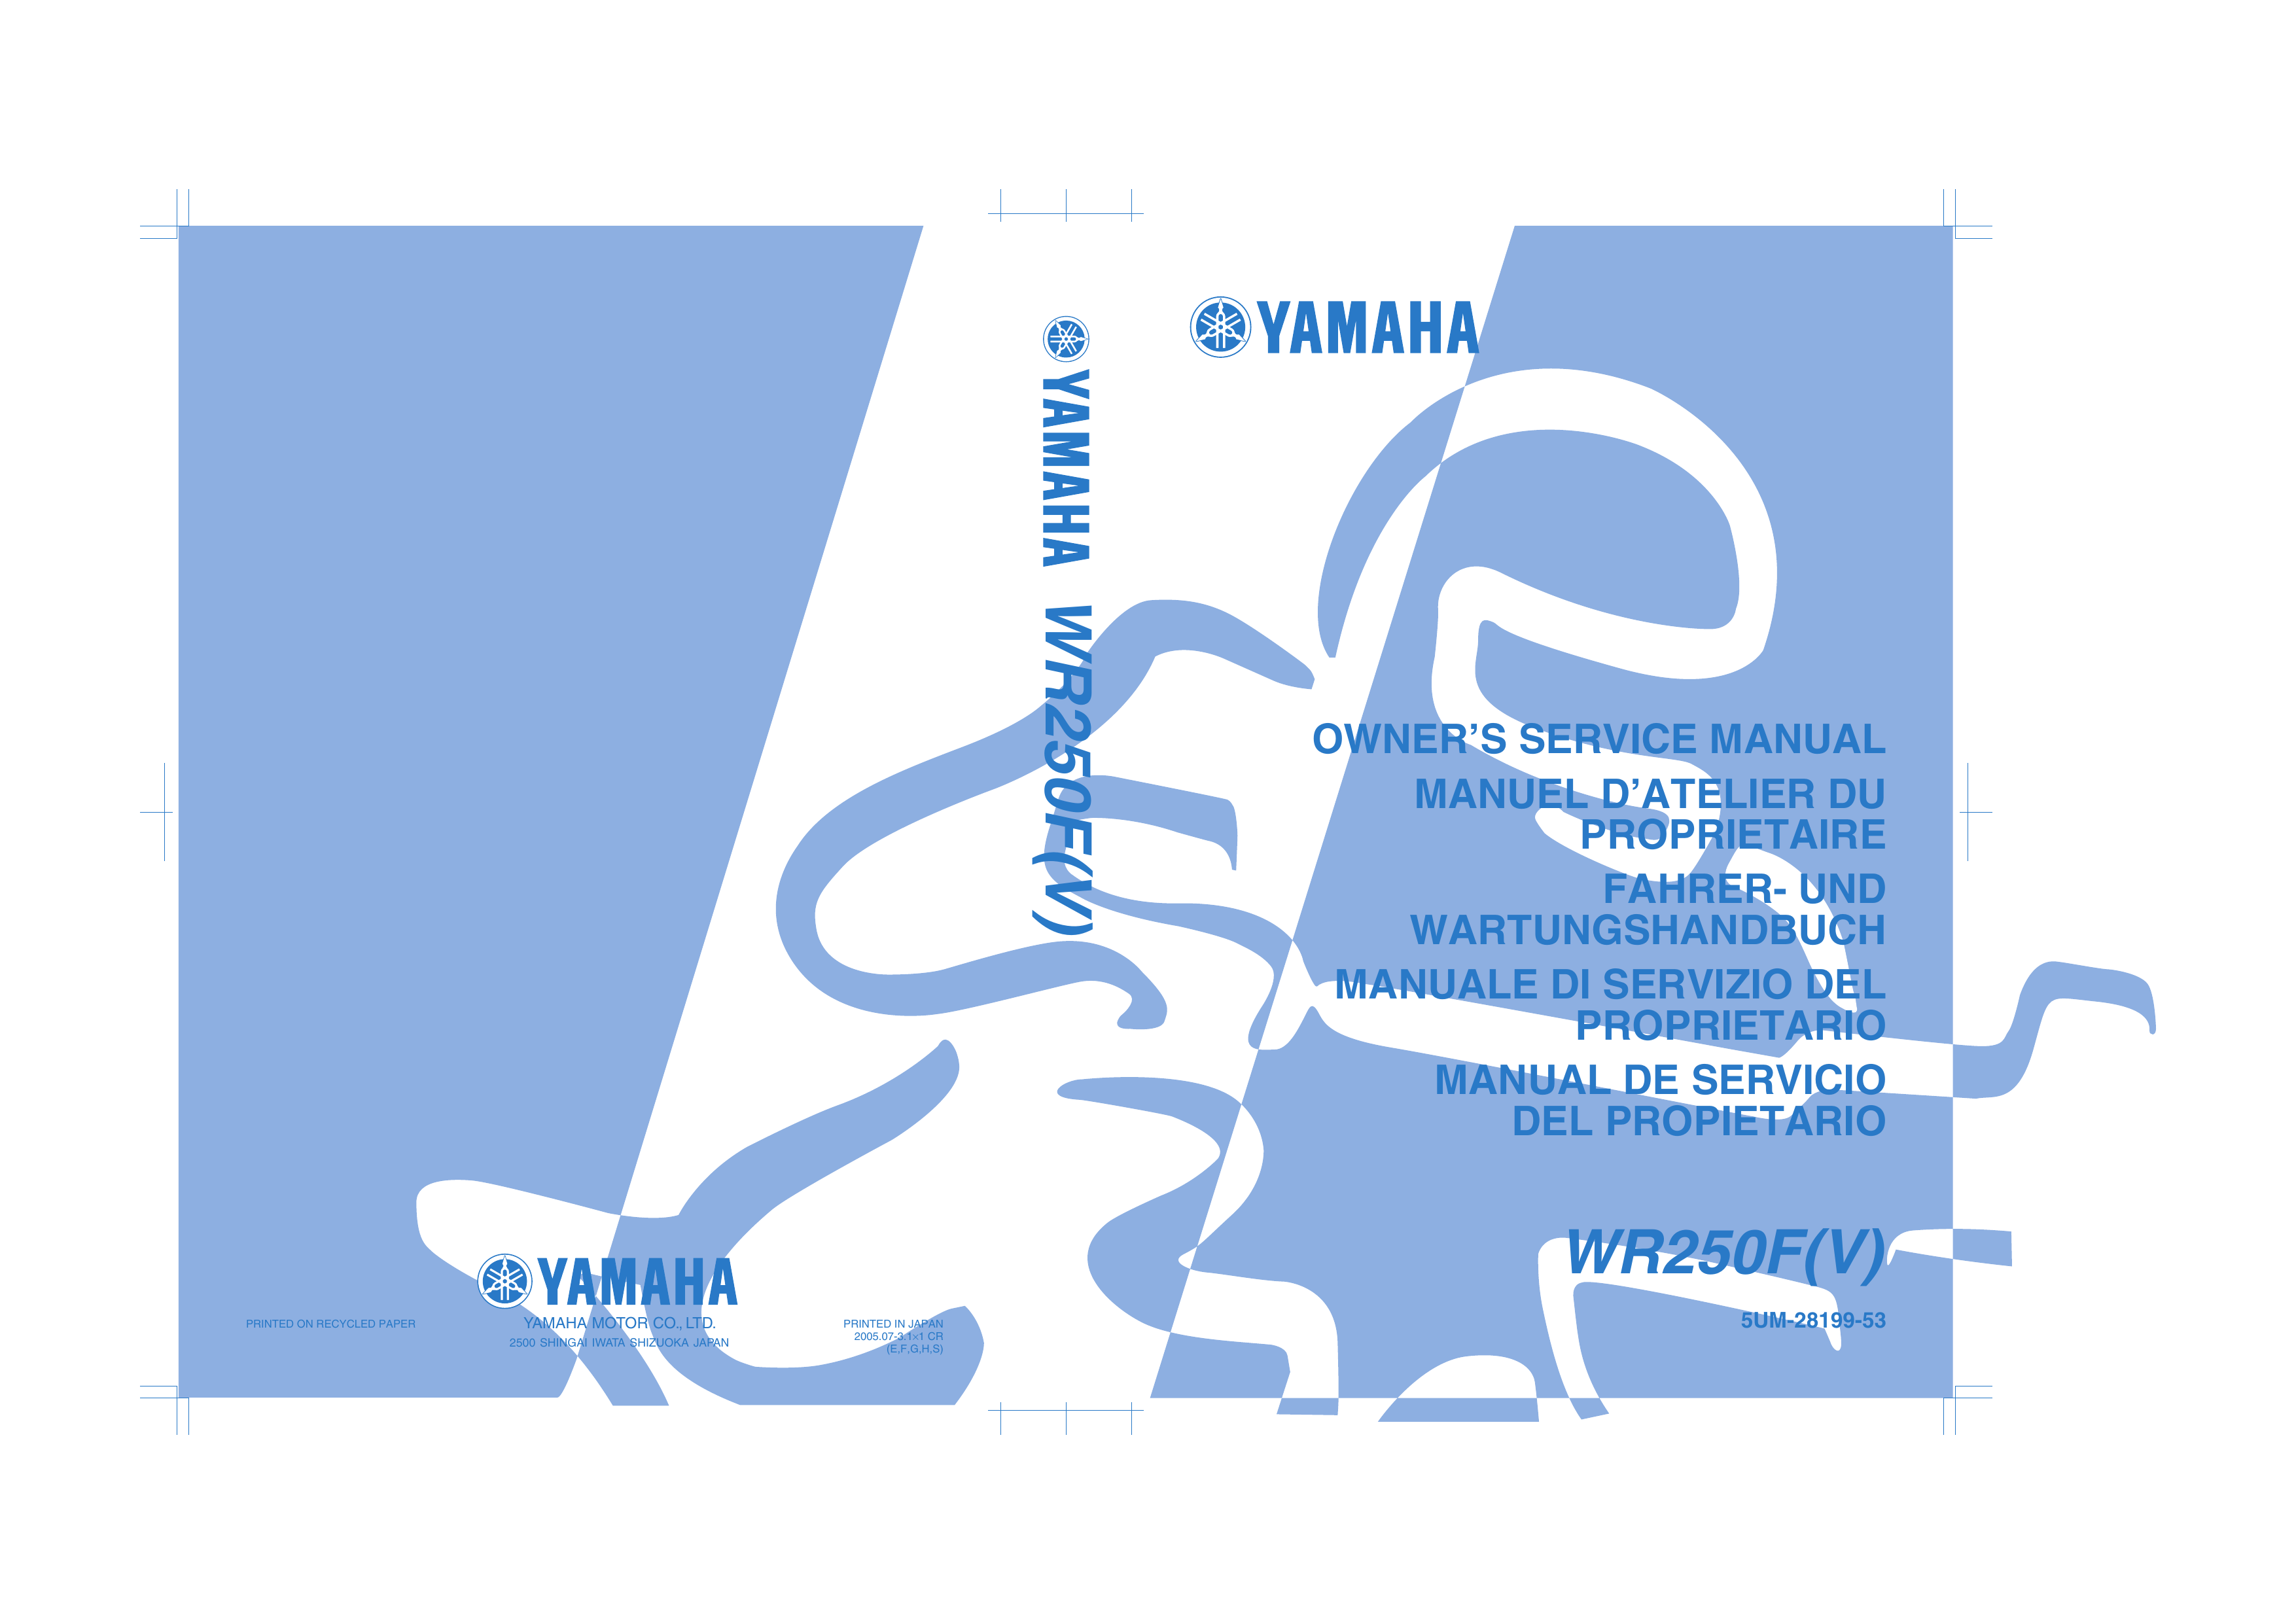 2006 Yamaha WR250F(V) owner´s service manual Preview image 1